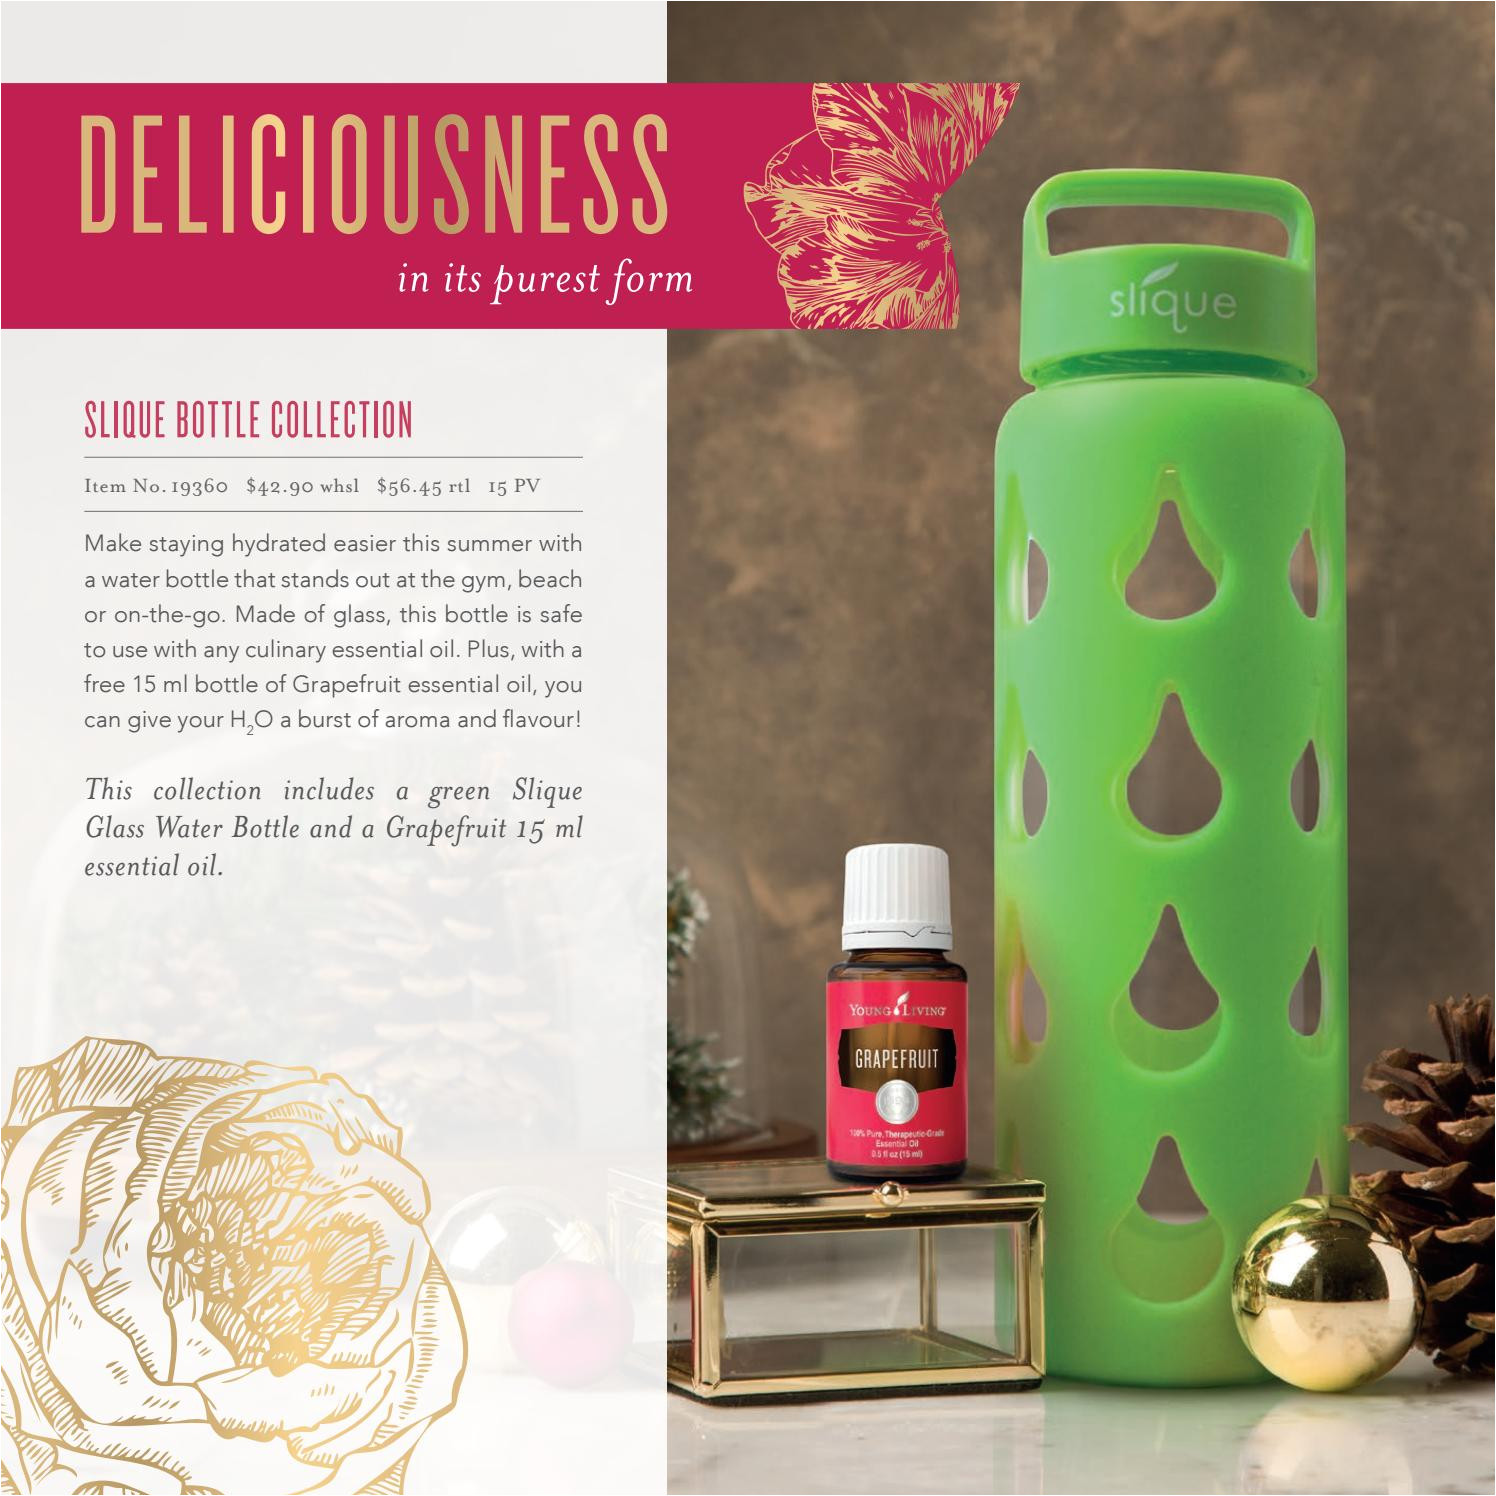 2016 christmas catalogue by young living essential oils australia new zealand issuu